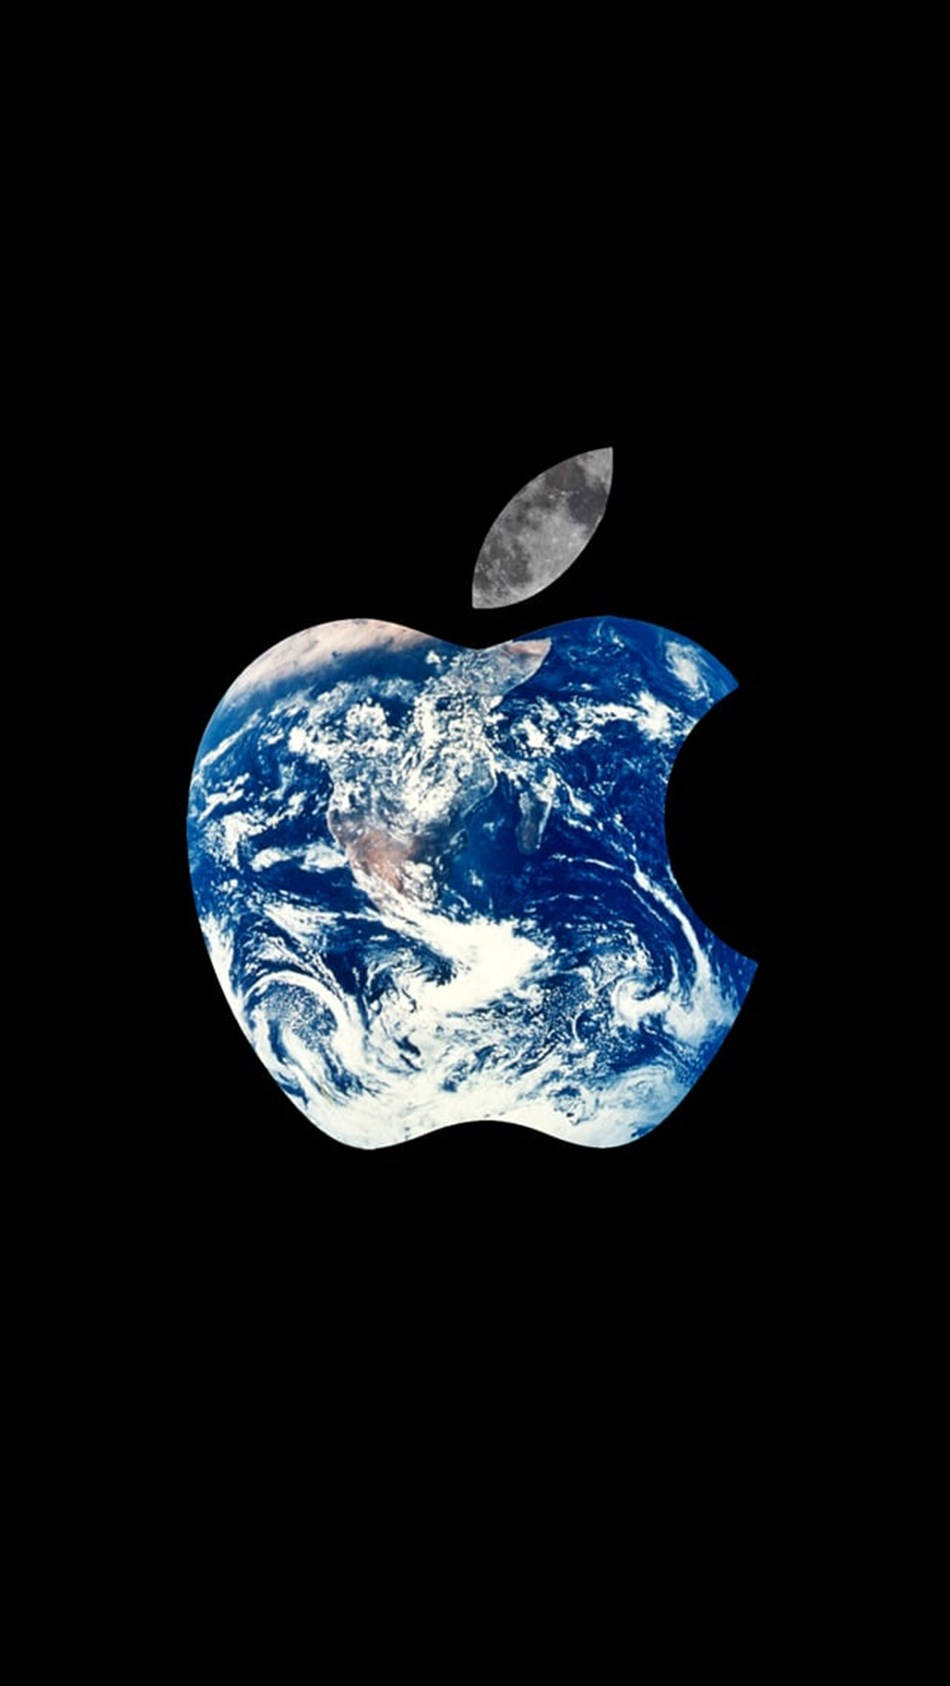 Ipod Touch Earth And Moon Inside Apple Logo Wallpaper